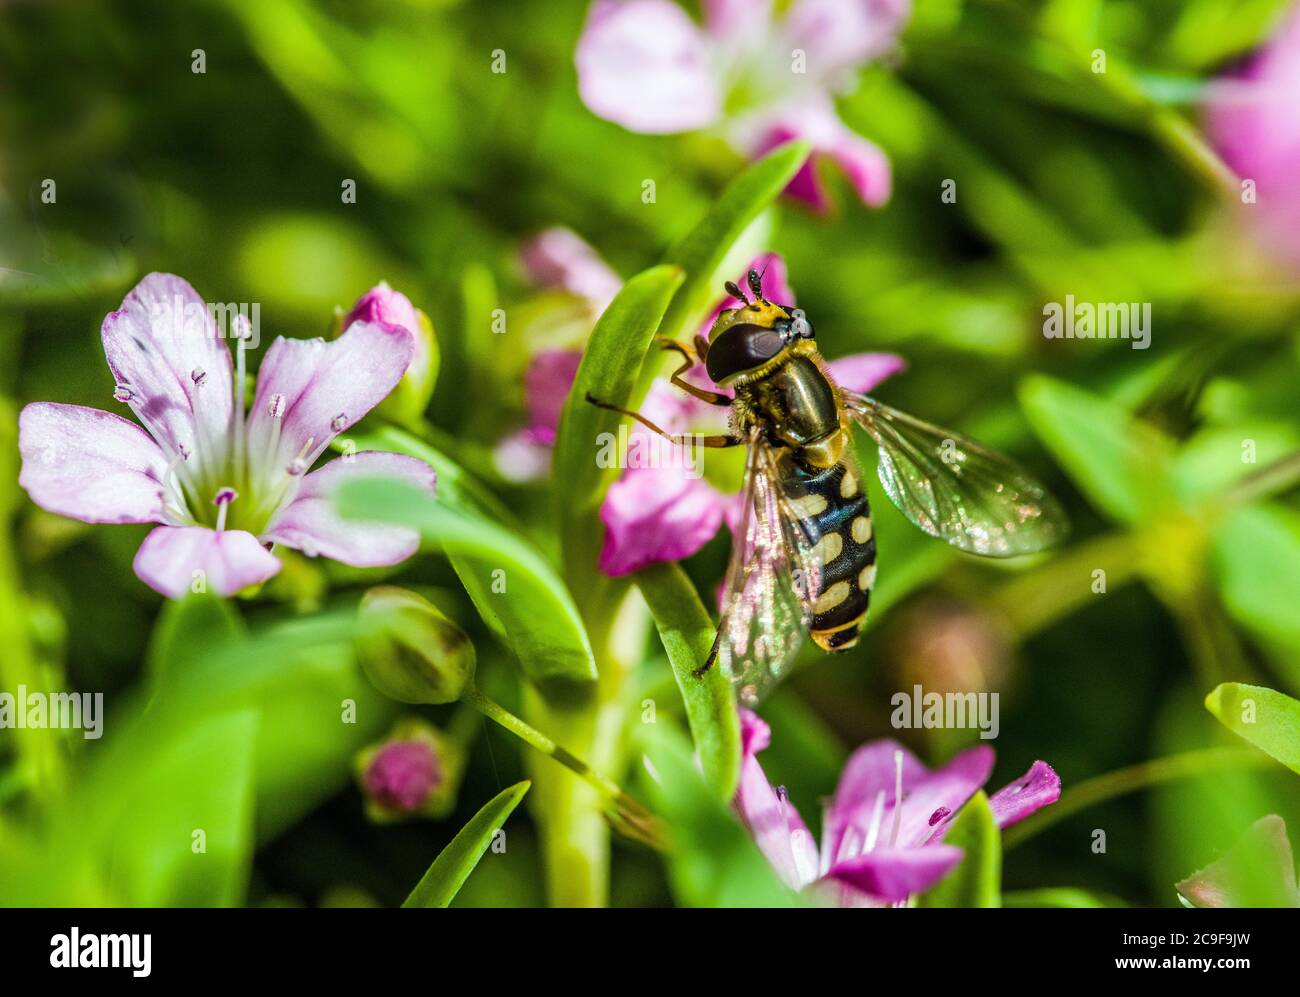 Hover Fly looking like a bee, seeking out nectar and pollen on a garden flower in July. Stock Photo